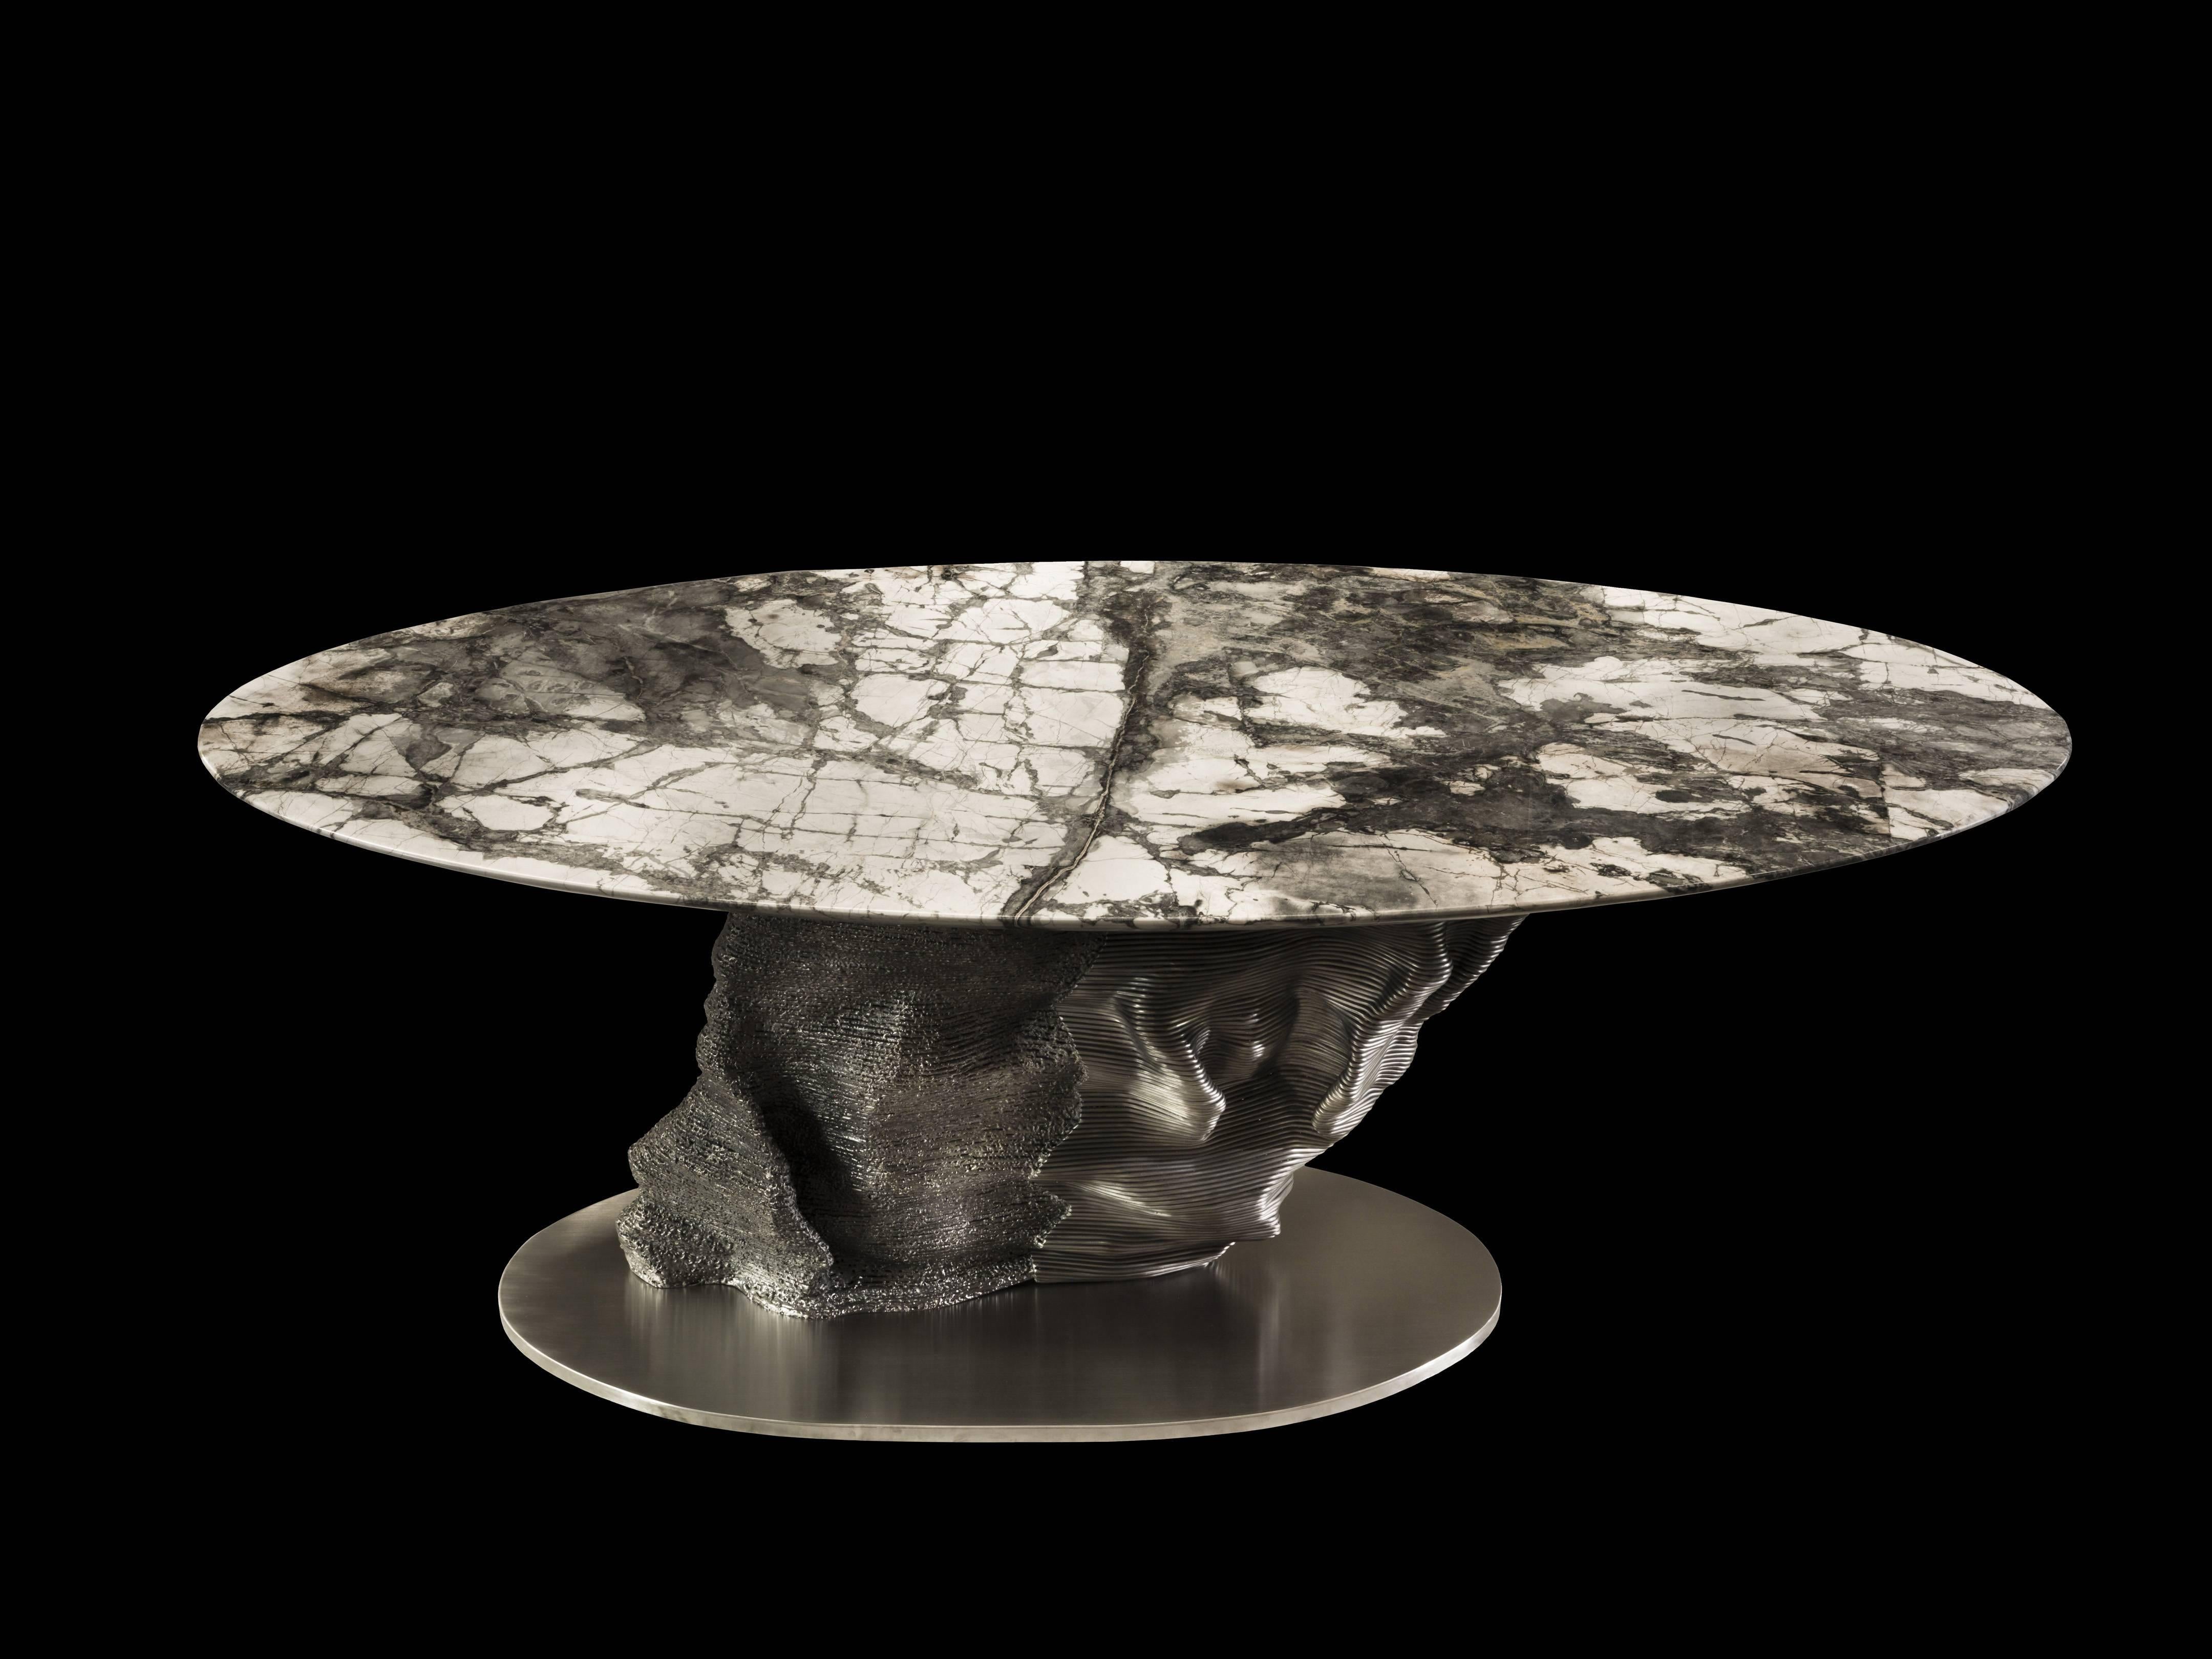 "Meteorite", Italian marble table with sculptural metal base - Art by Giorgio Pozzi